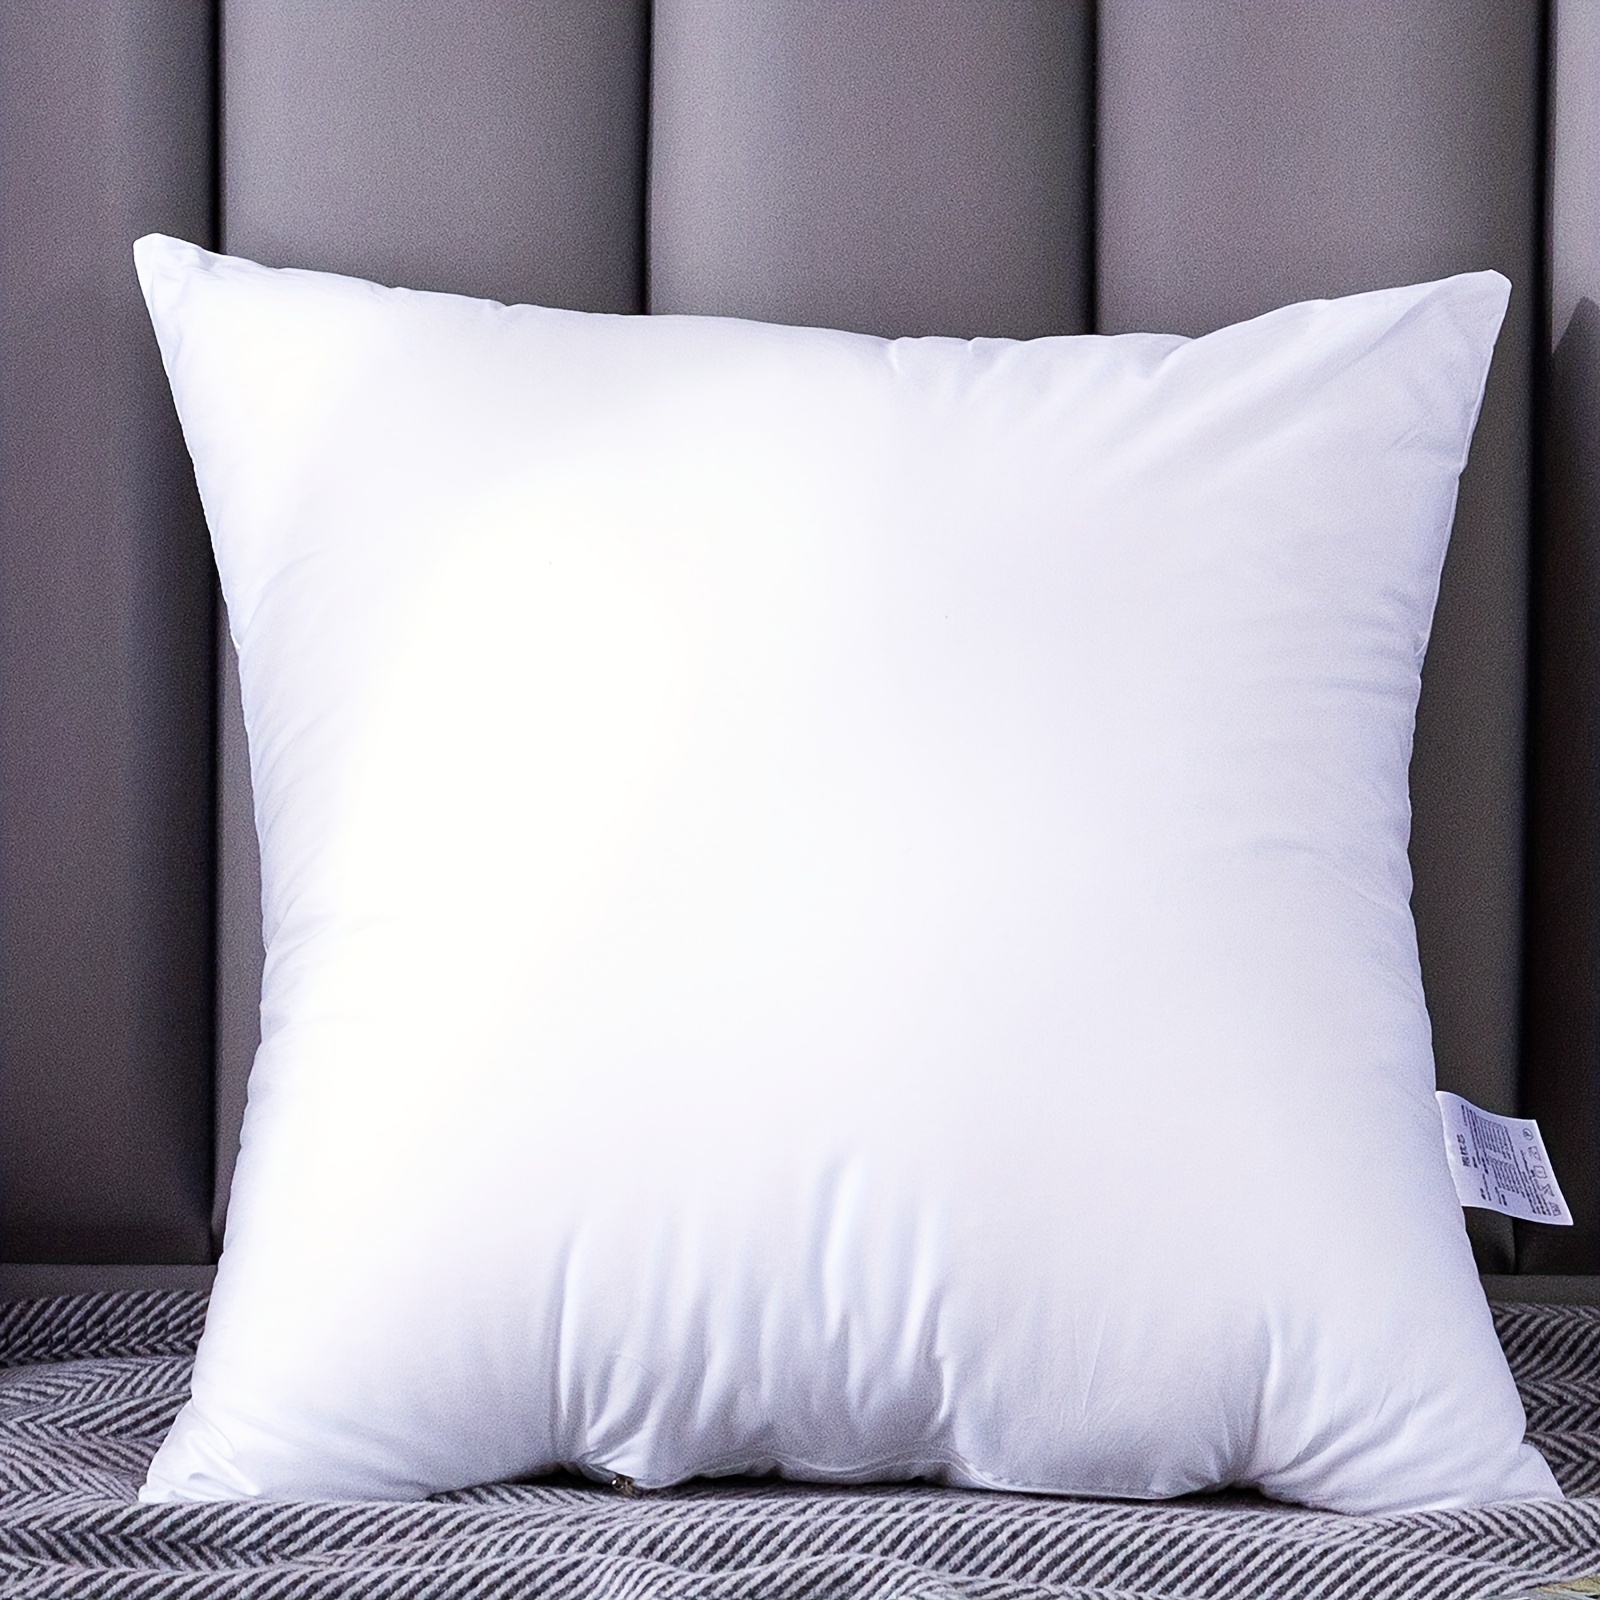 Decorative Pillows For Bed 